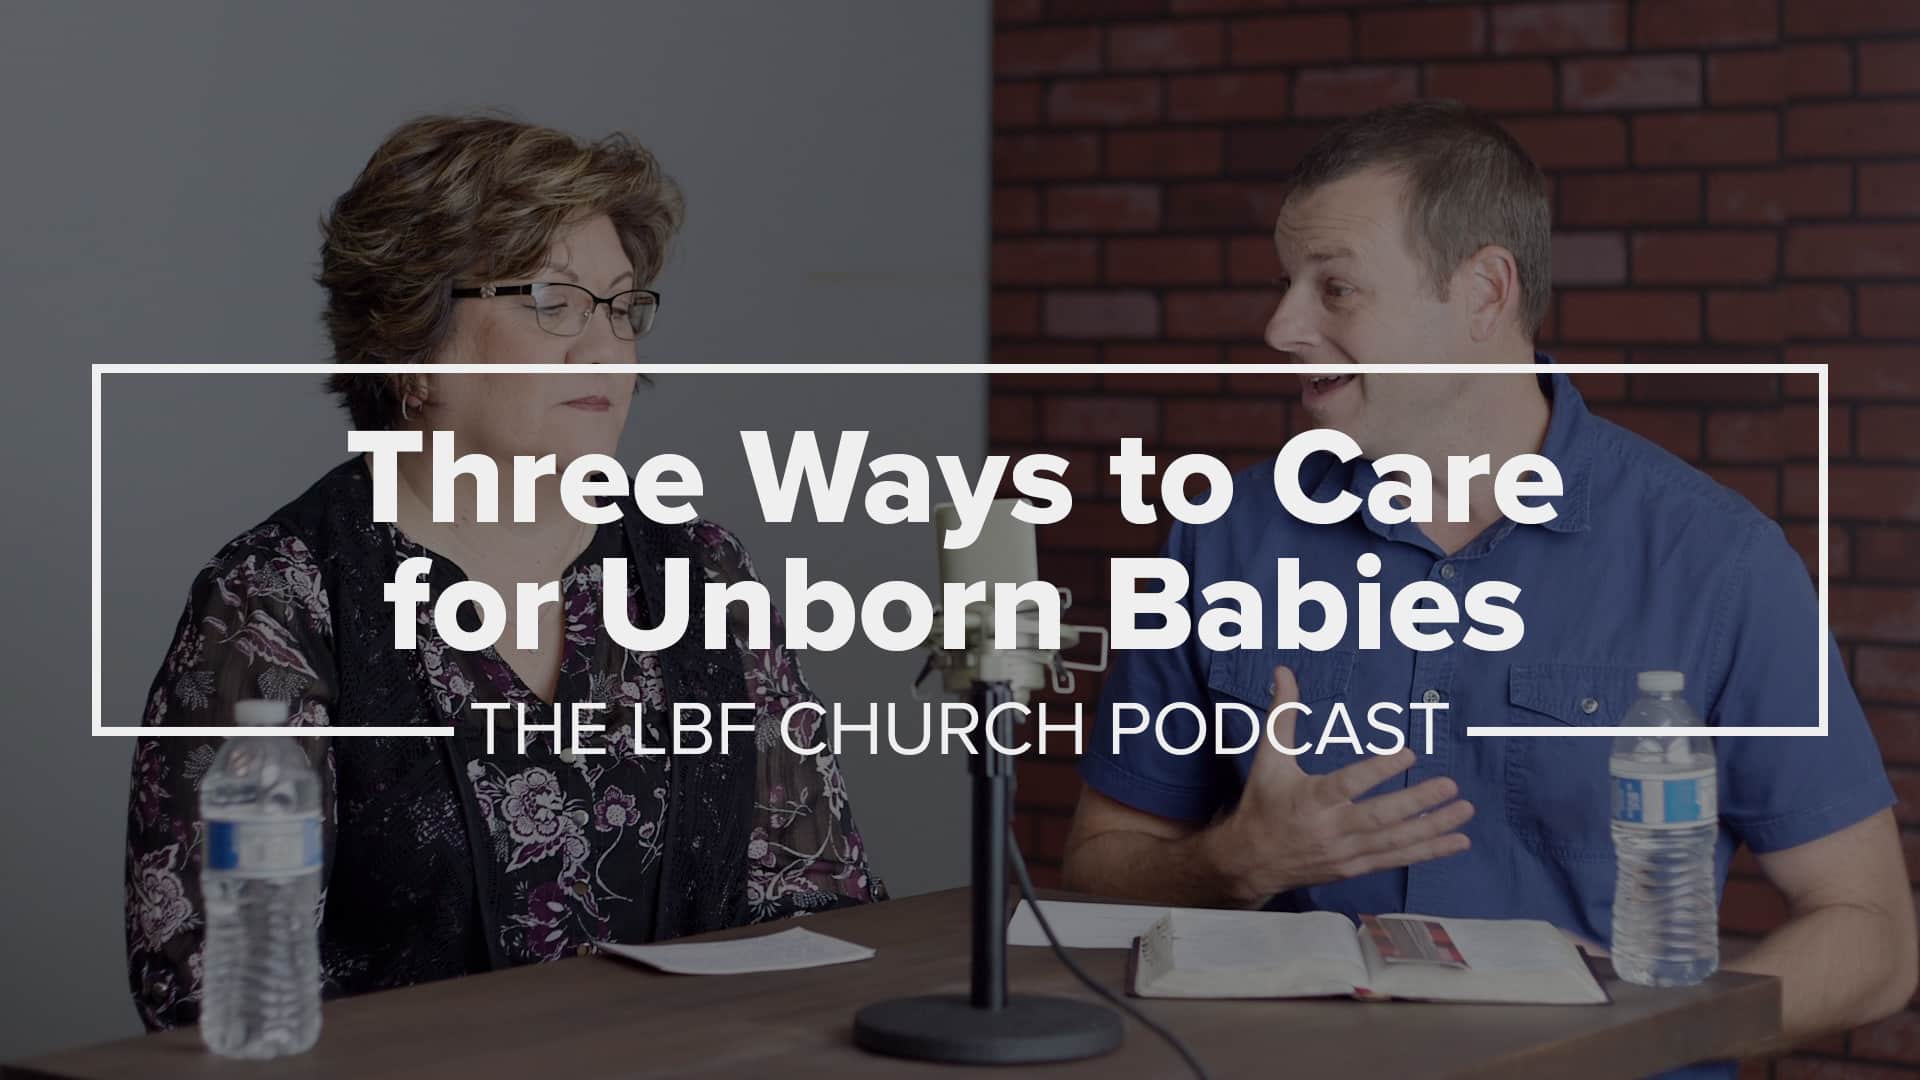 How to care for unborn babies